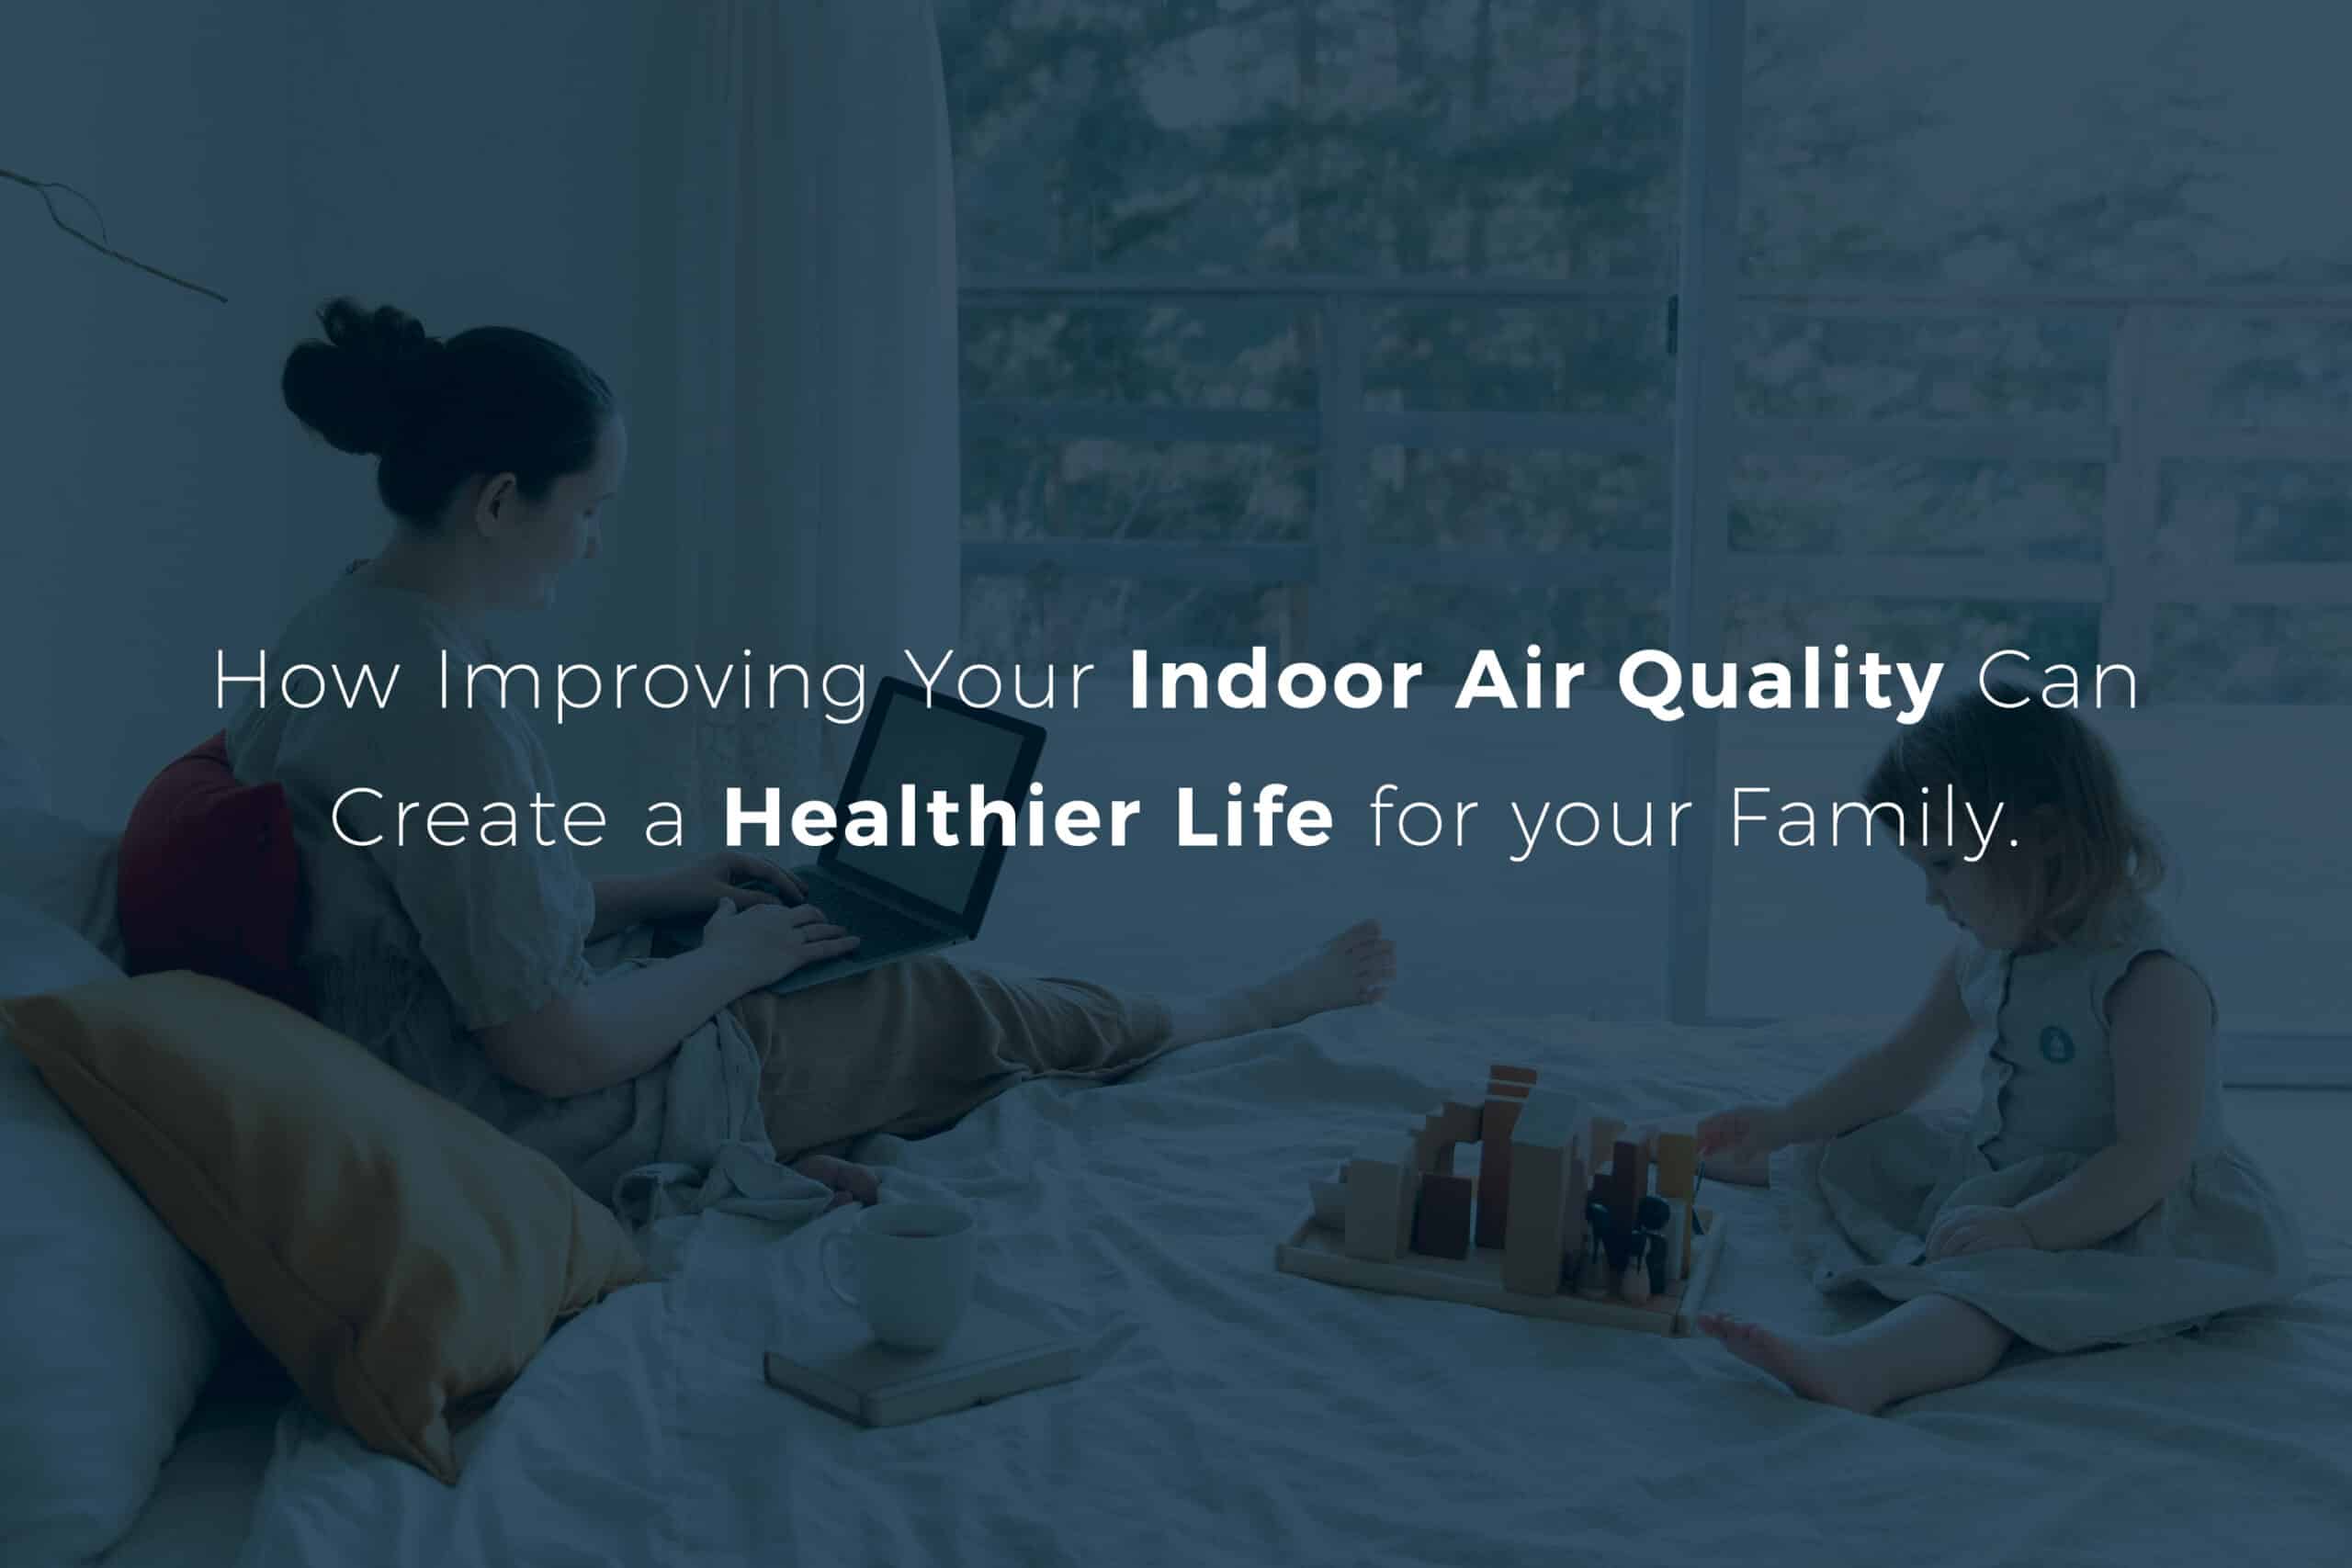 Headline that says "How Improving Your Indoor Air Quality Can Improve the Life of Your Family" with a photo of a mom annd young daughter sitting on a bed.